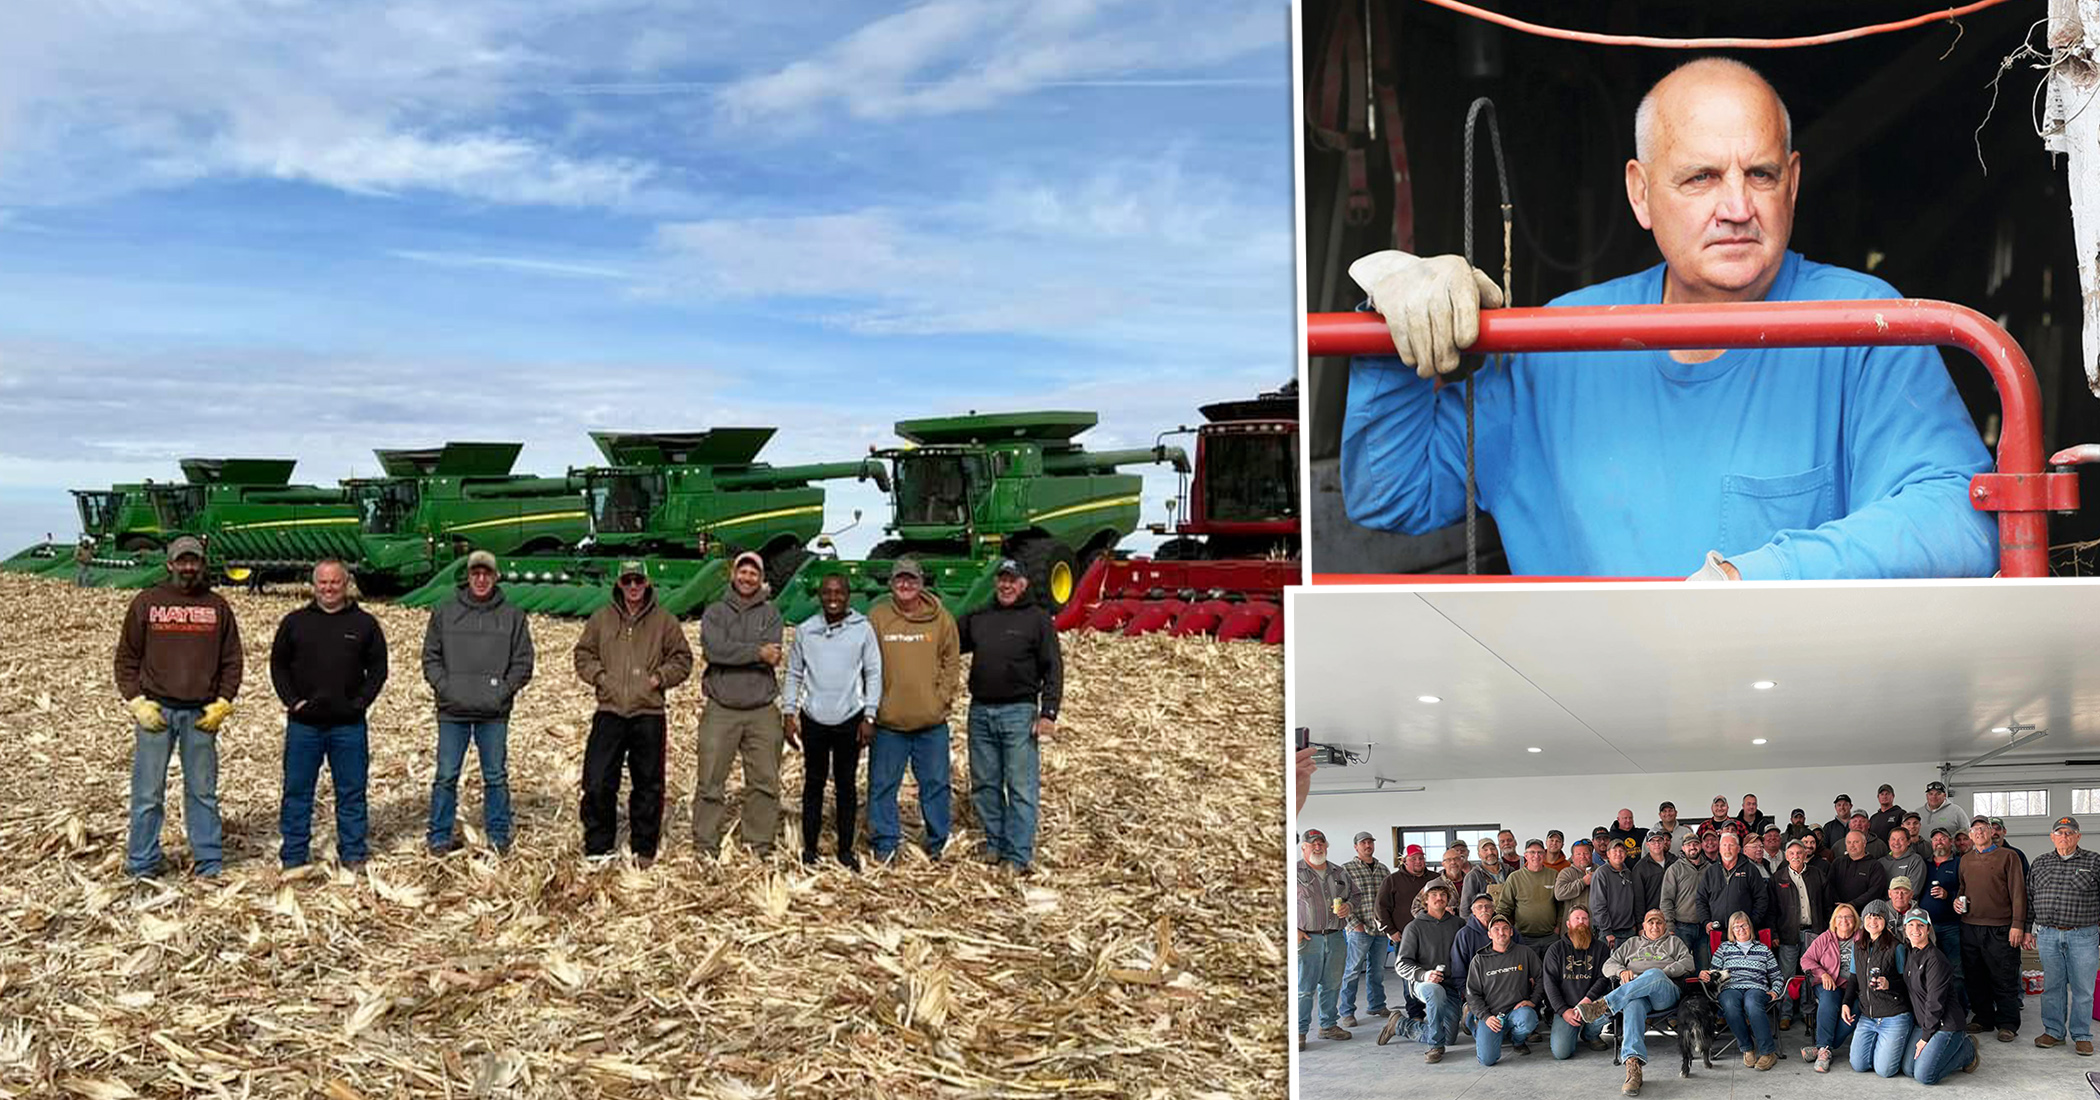 100 farmers, neighbors help harvest Iowa farmer’s crops after he died suddenly from cancer